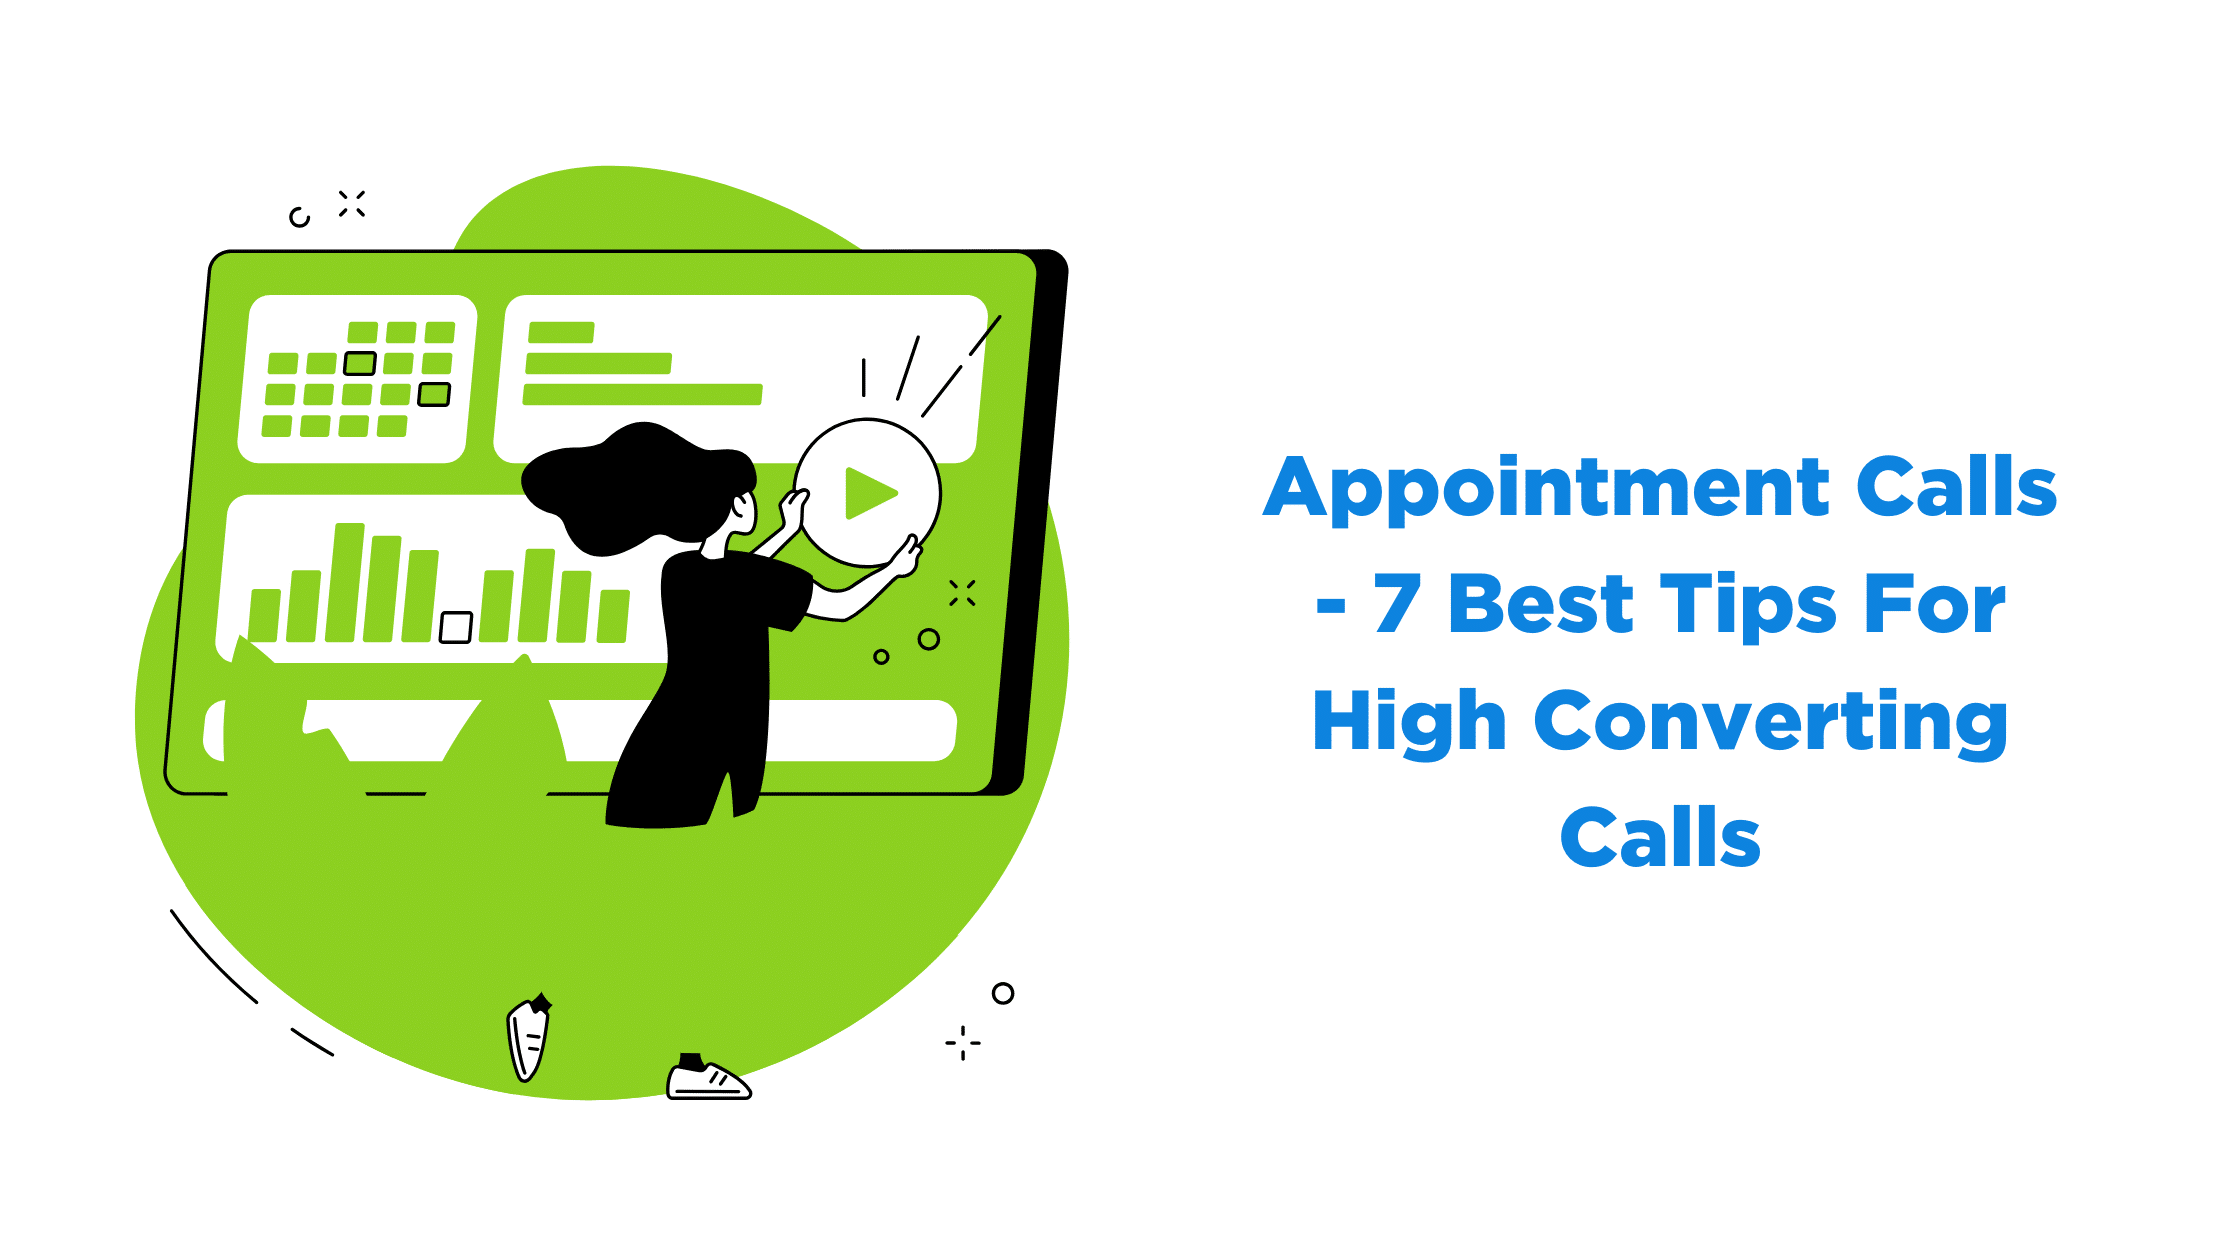 Appointment Calls - 7 Best Tips For High Converting Calls